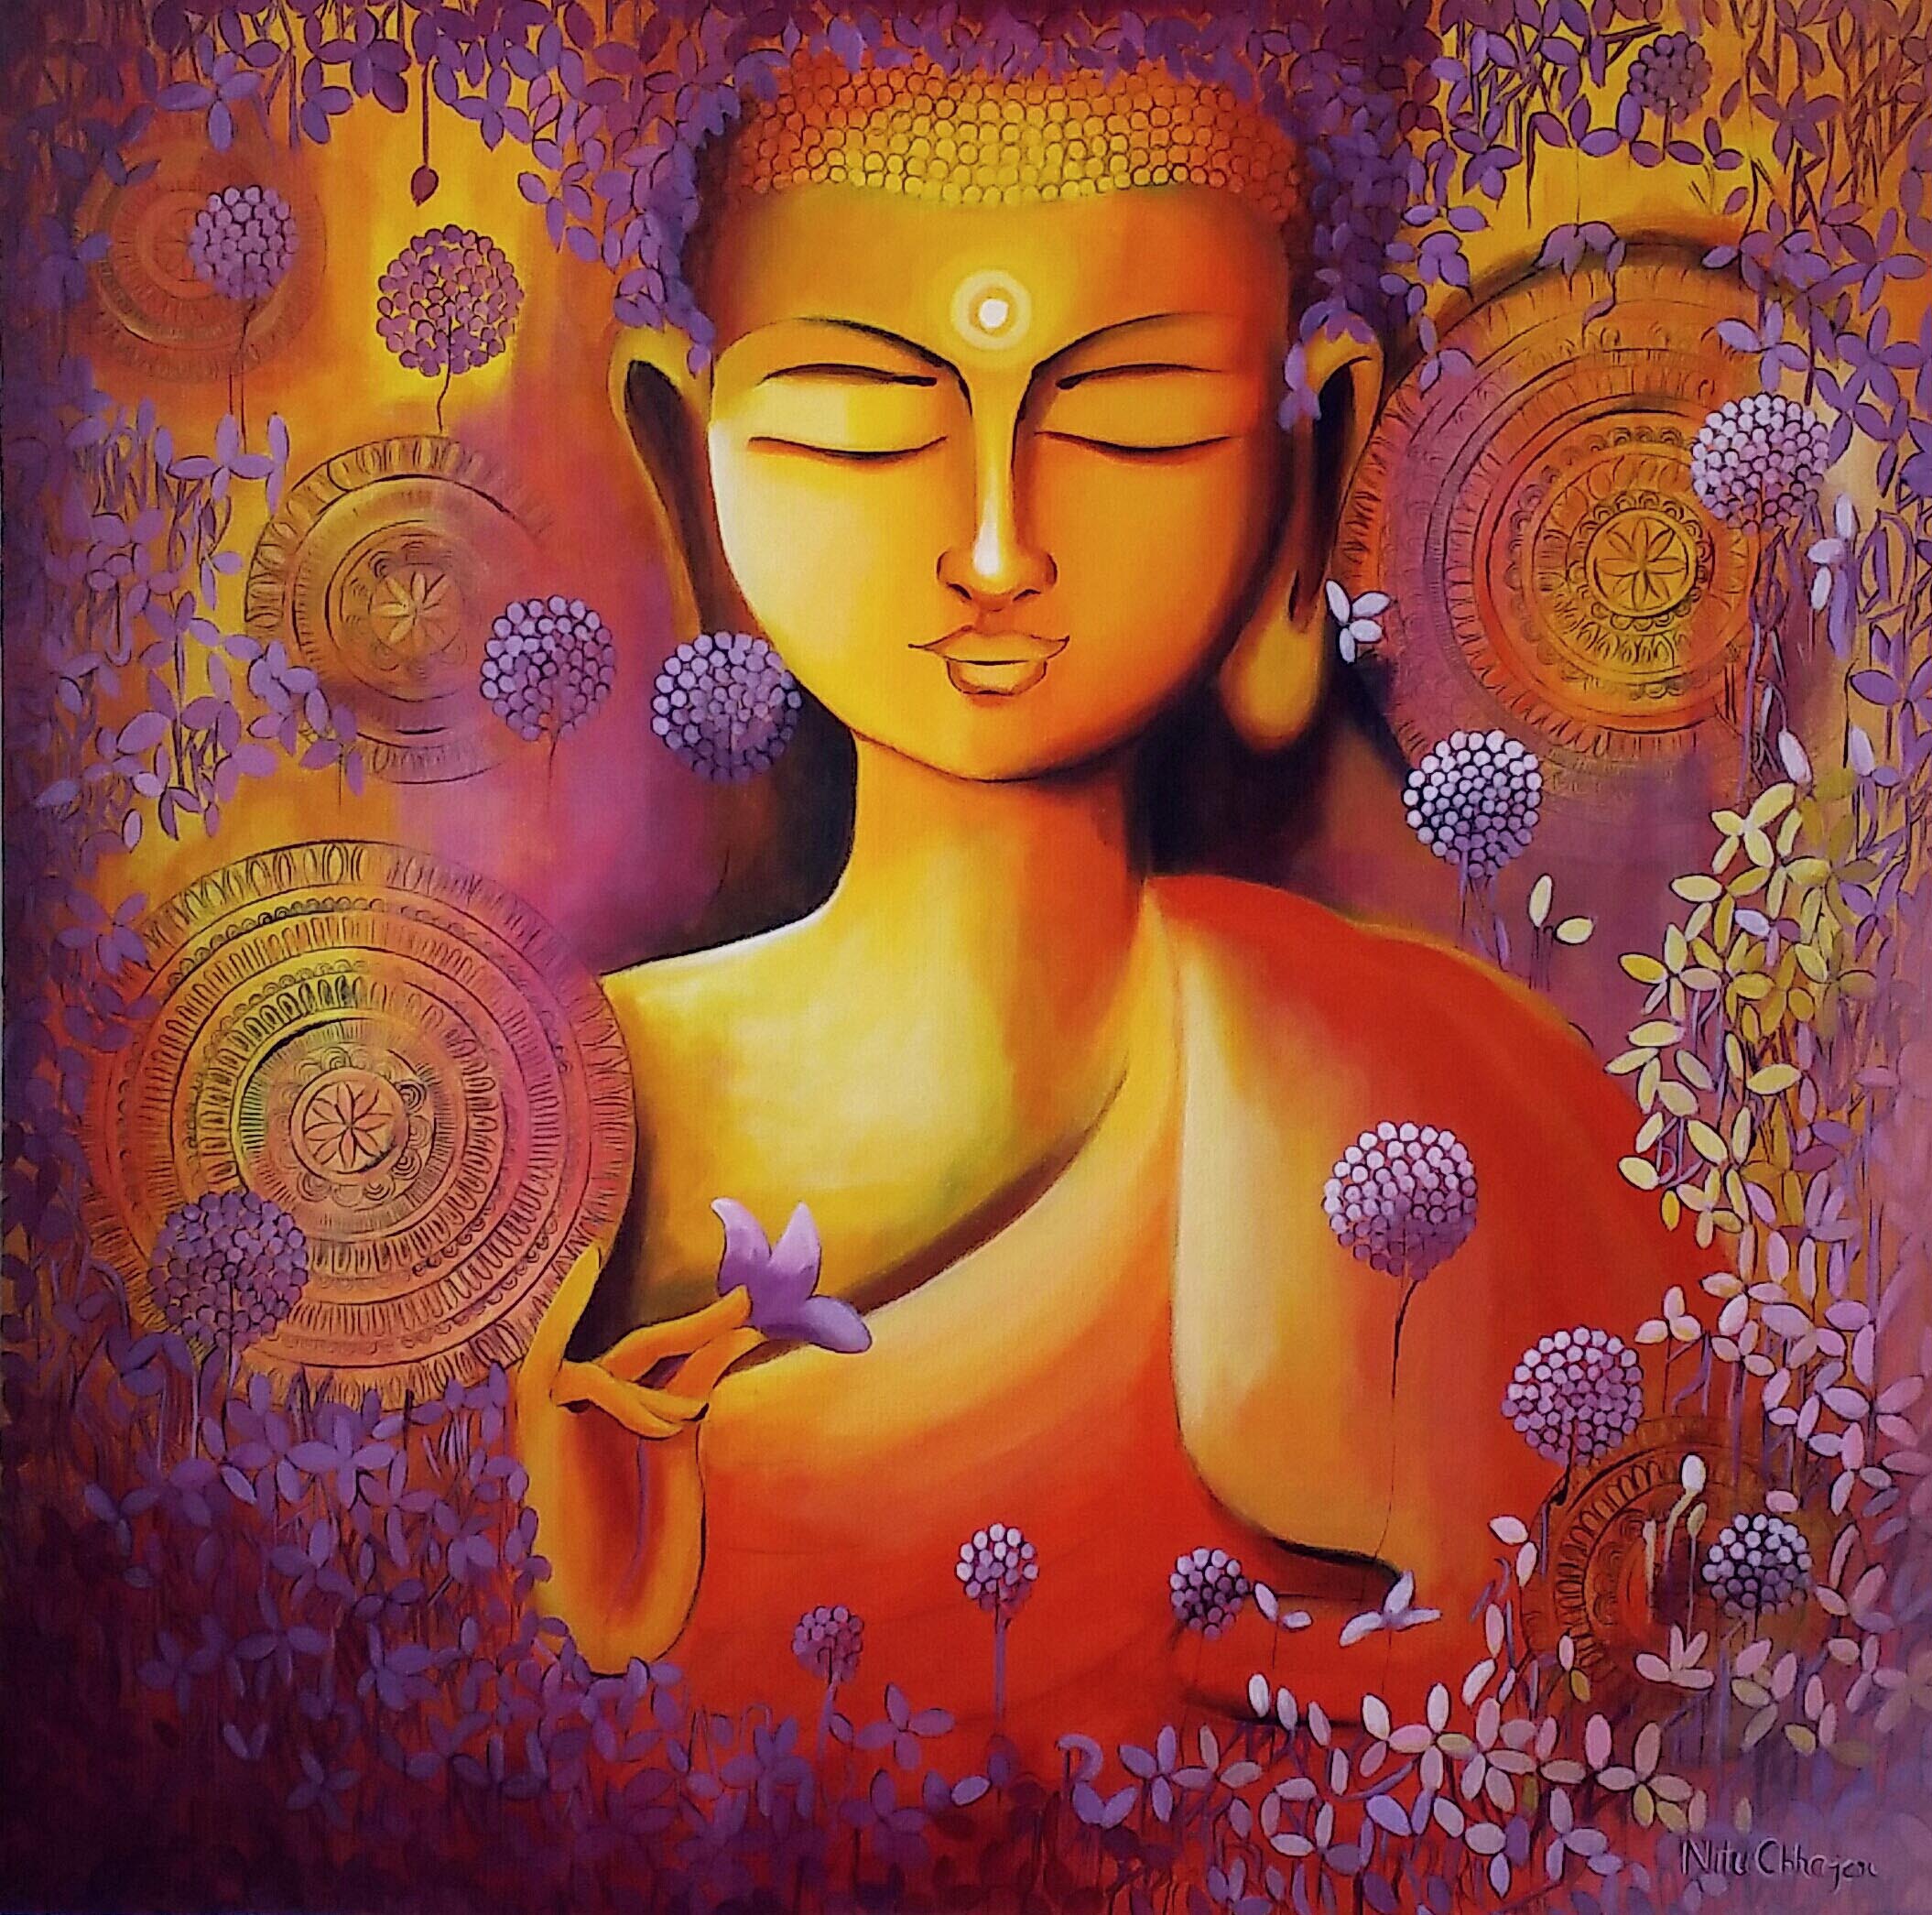 Influence of Buddhism on Indian art